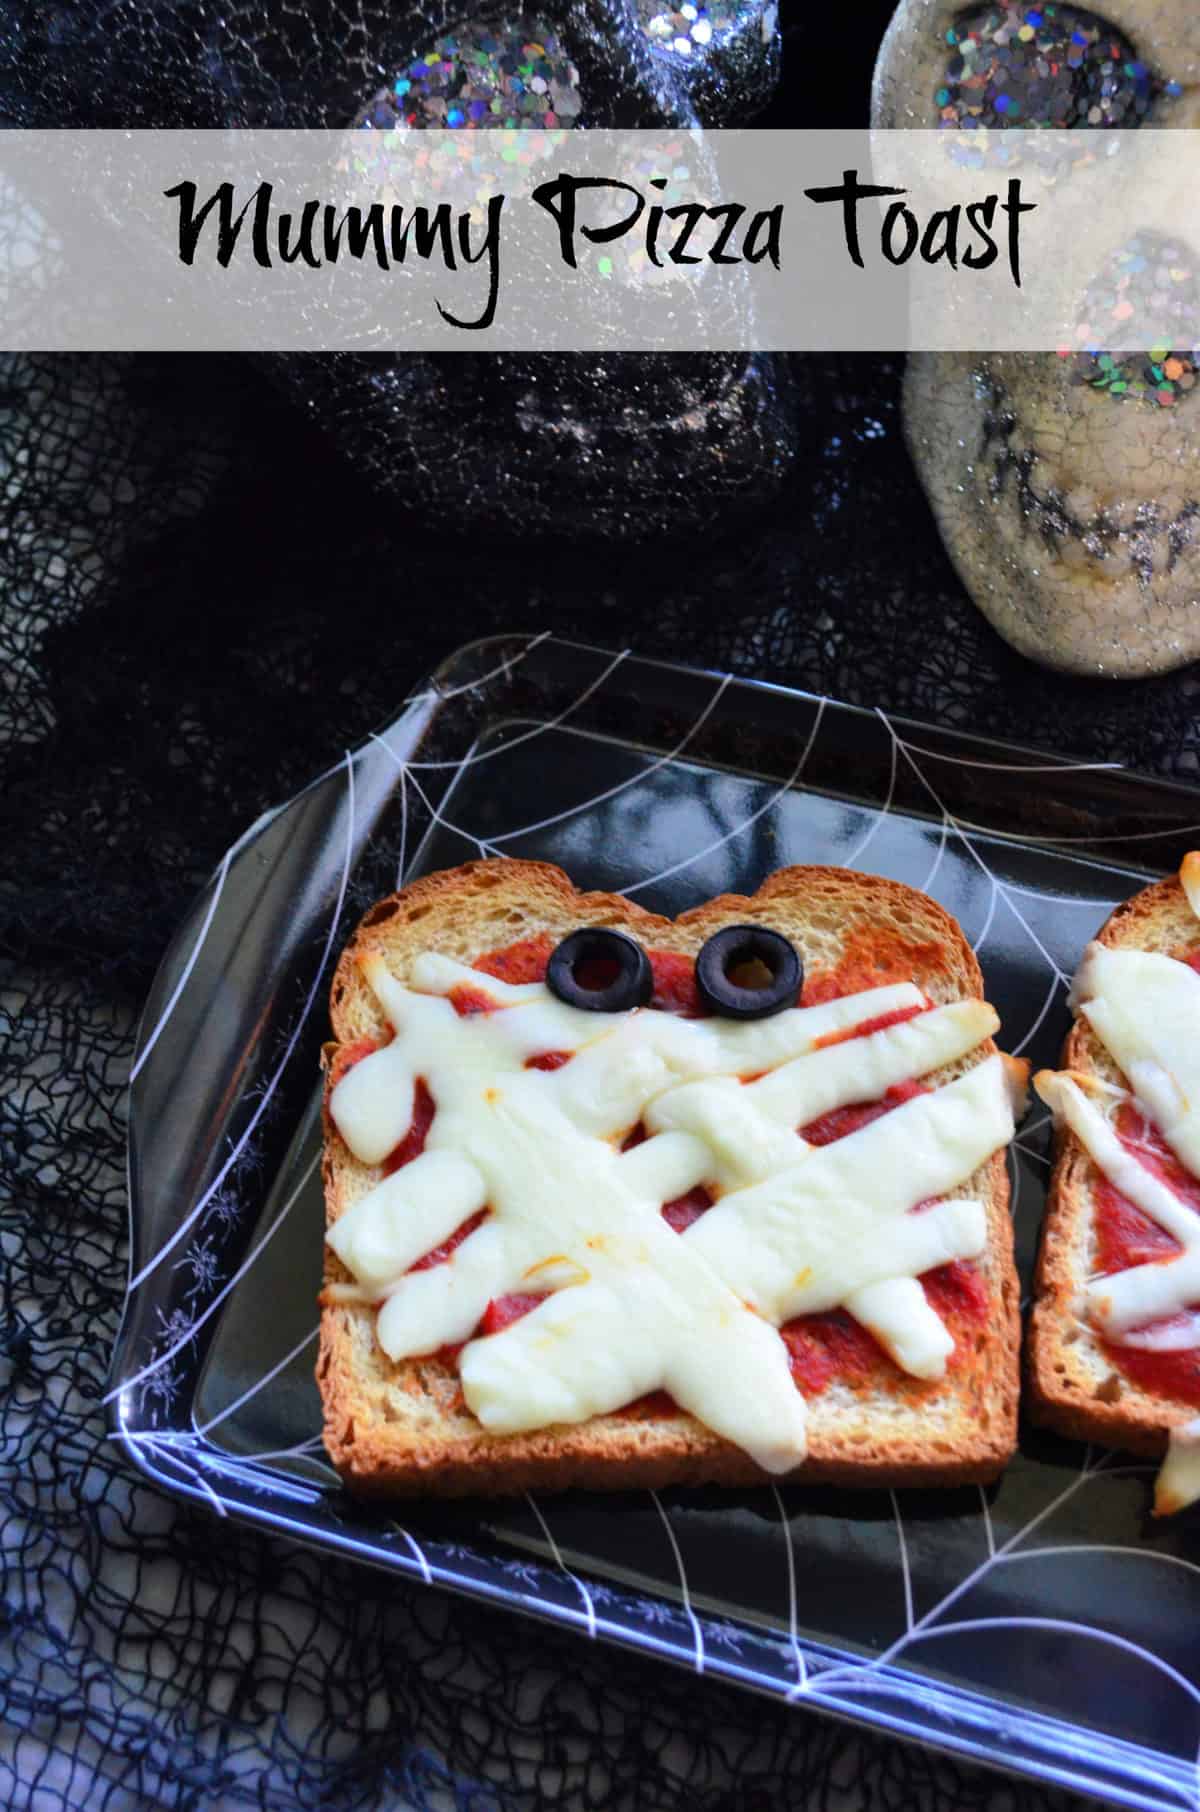 Toast with marinara, mozzarella and olives to look like mummy face on spiderweb platter with title text.